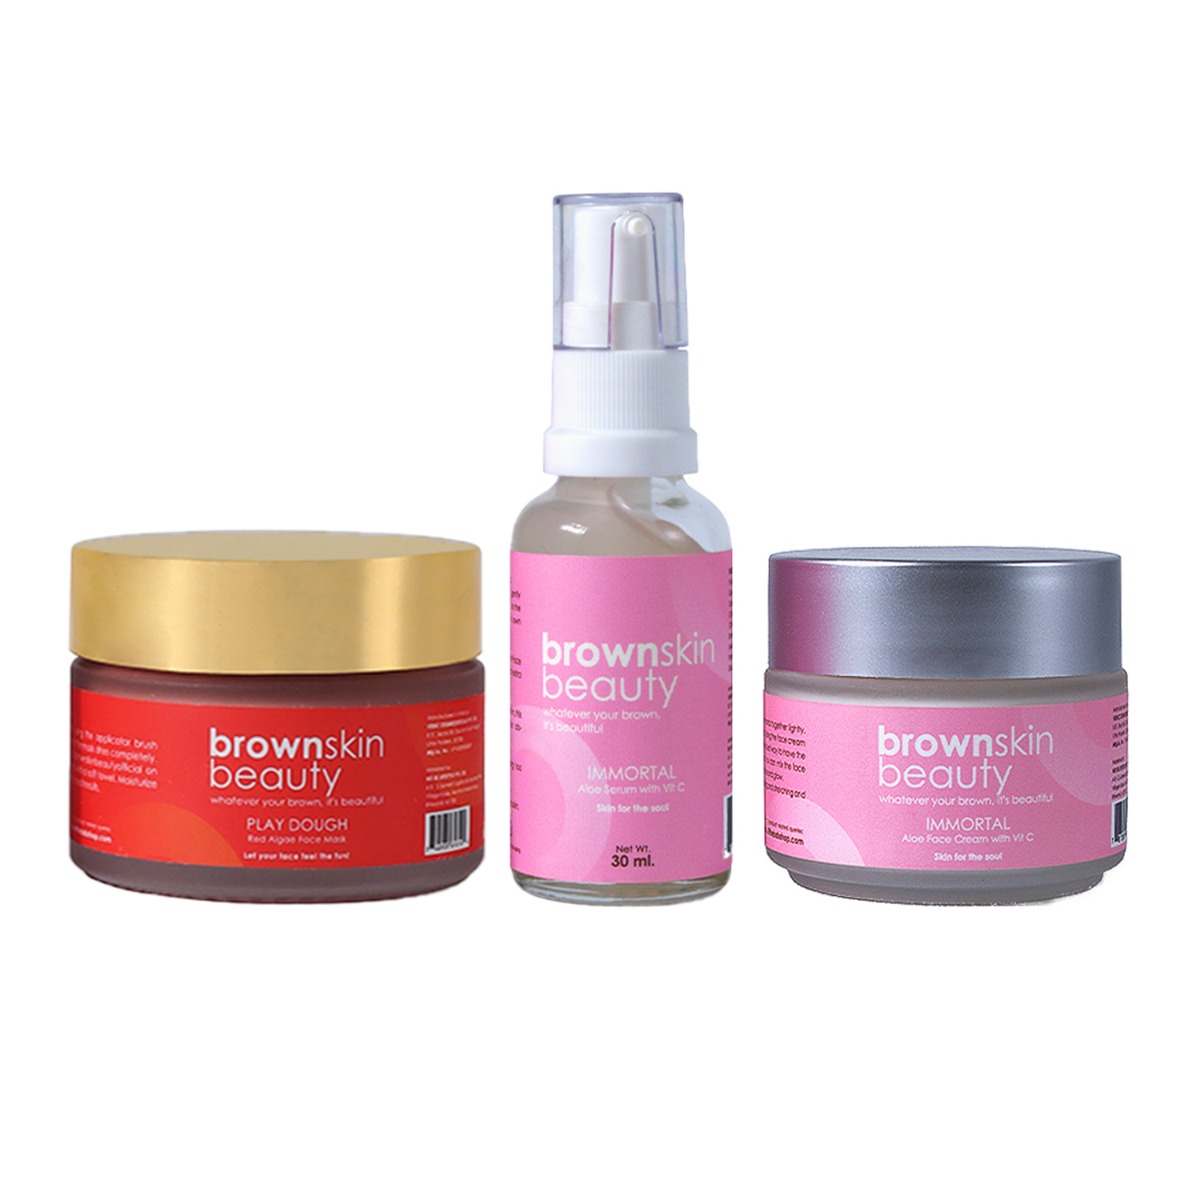 BrownSkin Beauty Play Set - Cleanse + Hydrate Skincare Set with Free Travel Pouch!